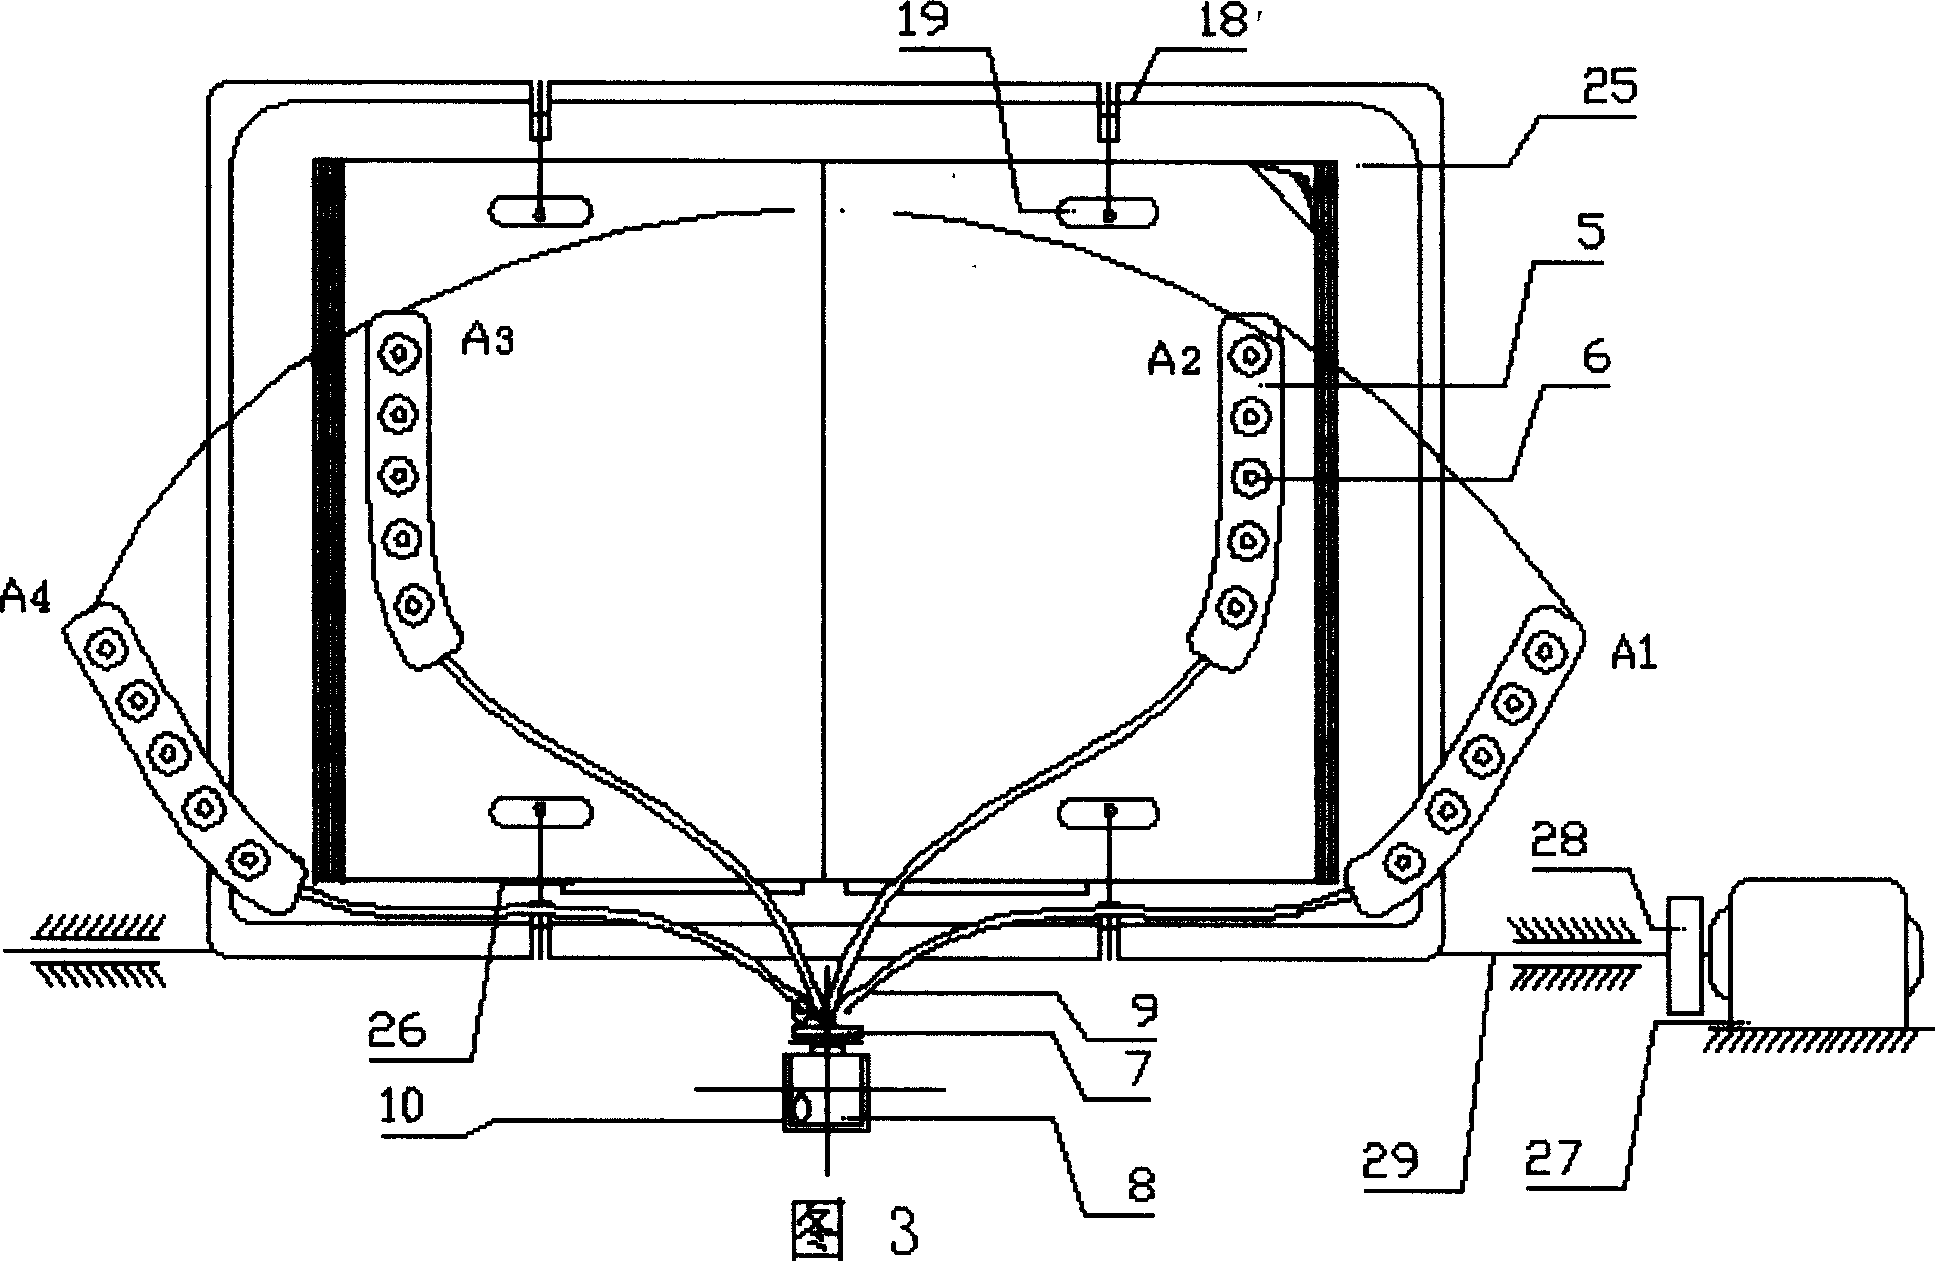 Automatic page turning device